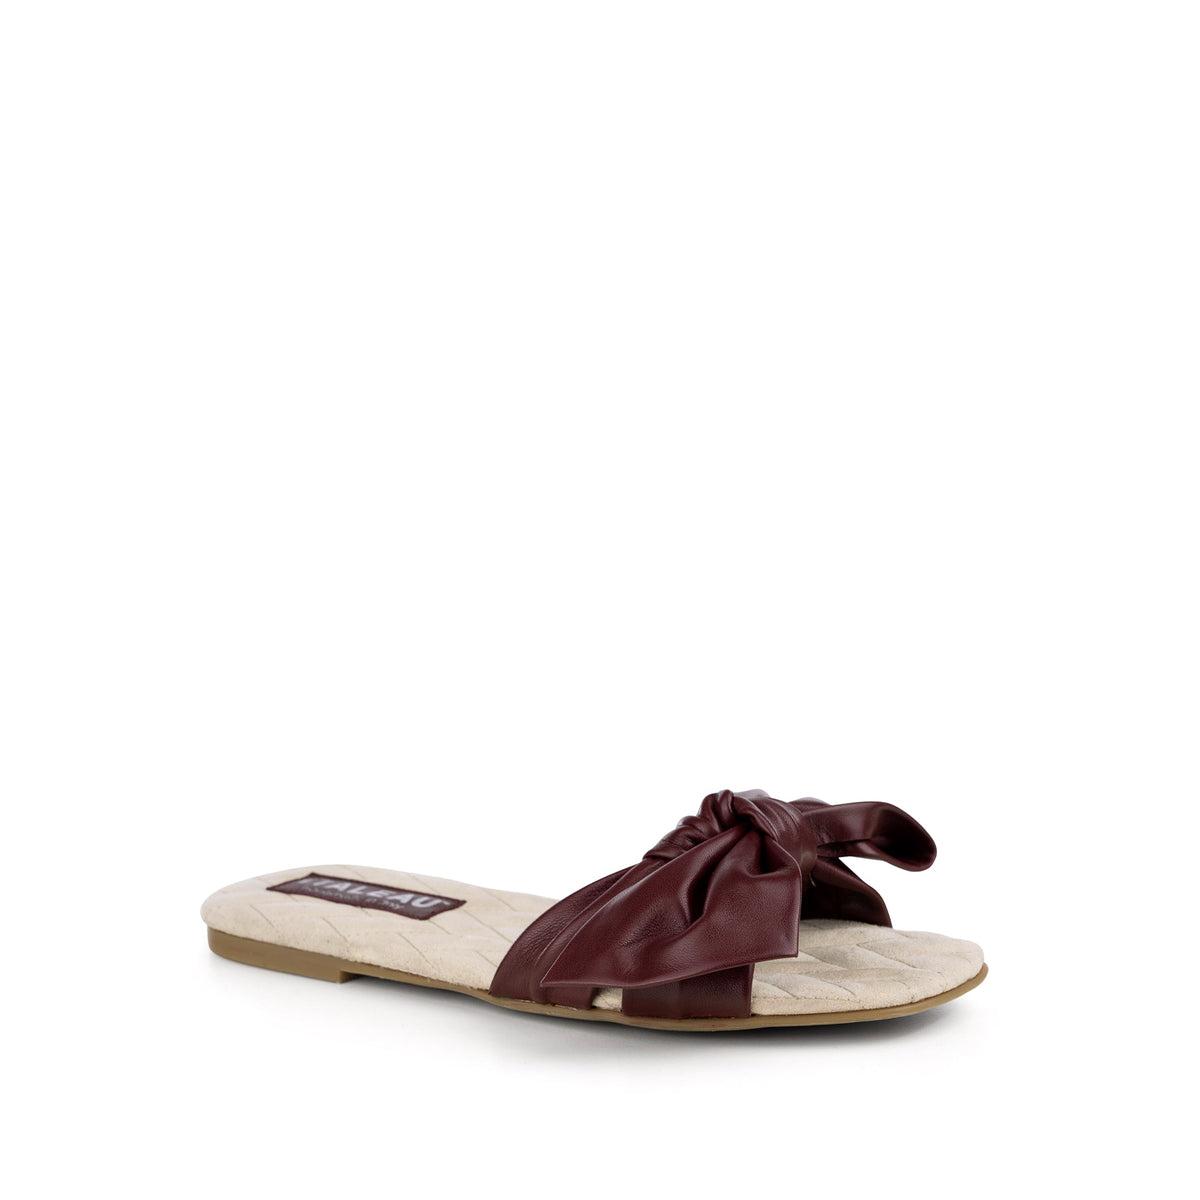 Italeau Dona sandals are comfortable and handmade in Italy